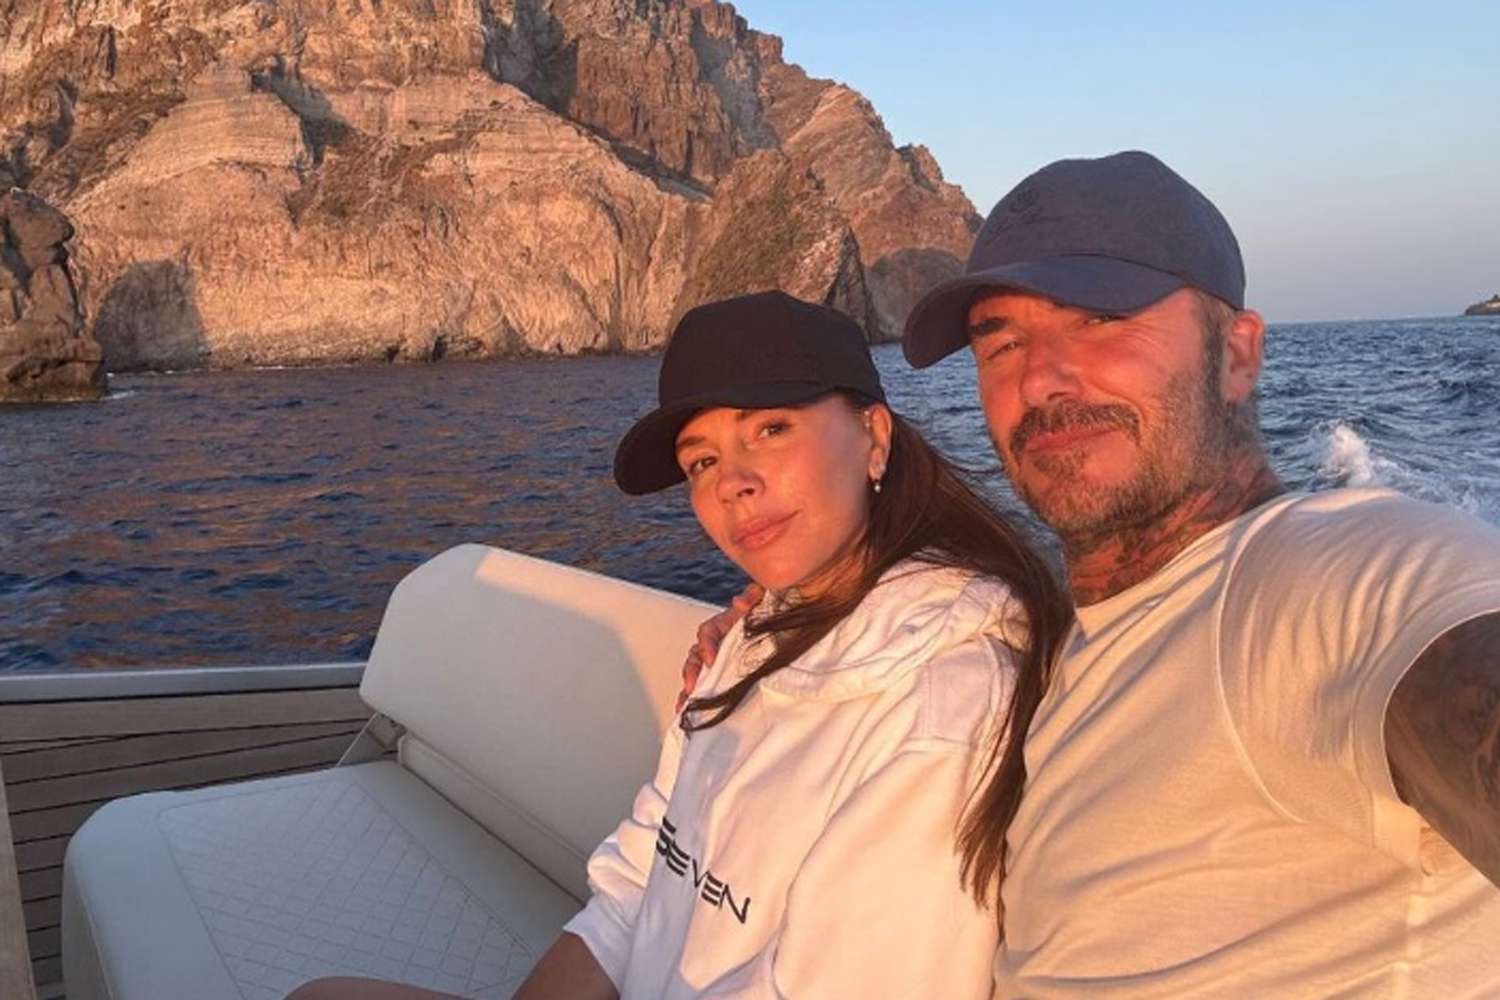 David Beckham Jokes Wife Victoria Is ‘Annoyingly Elegant’ on Vacation as He Posts Photos of Her Outfits in Italy